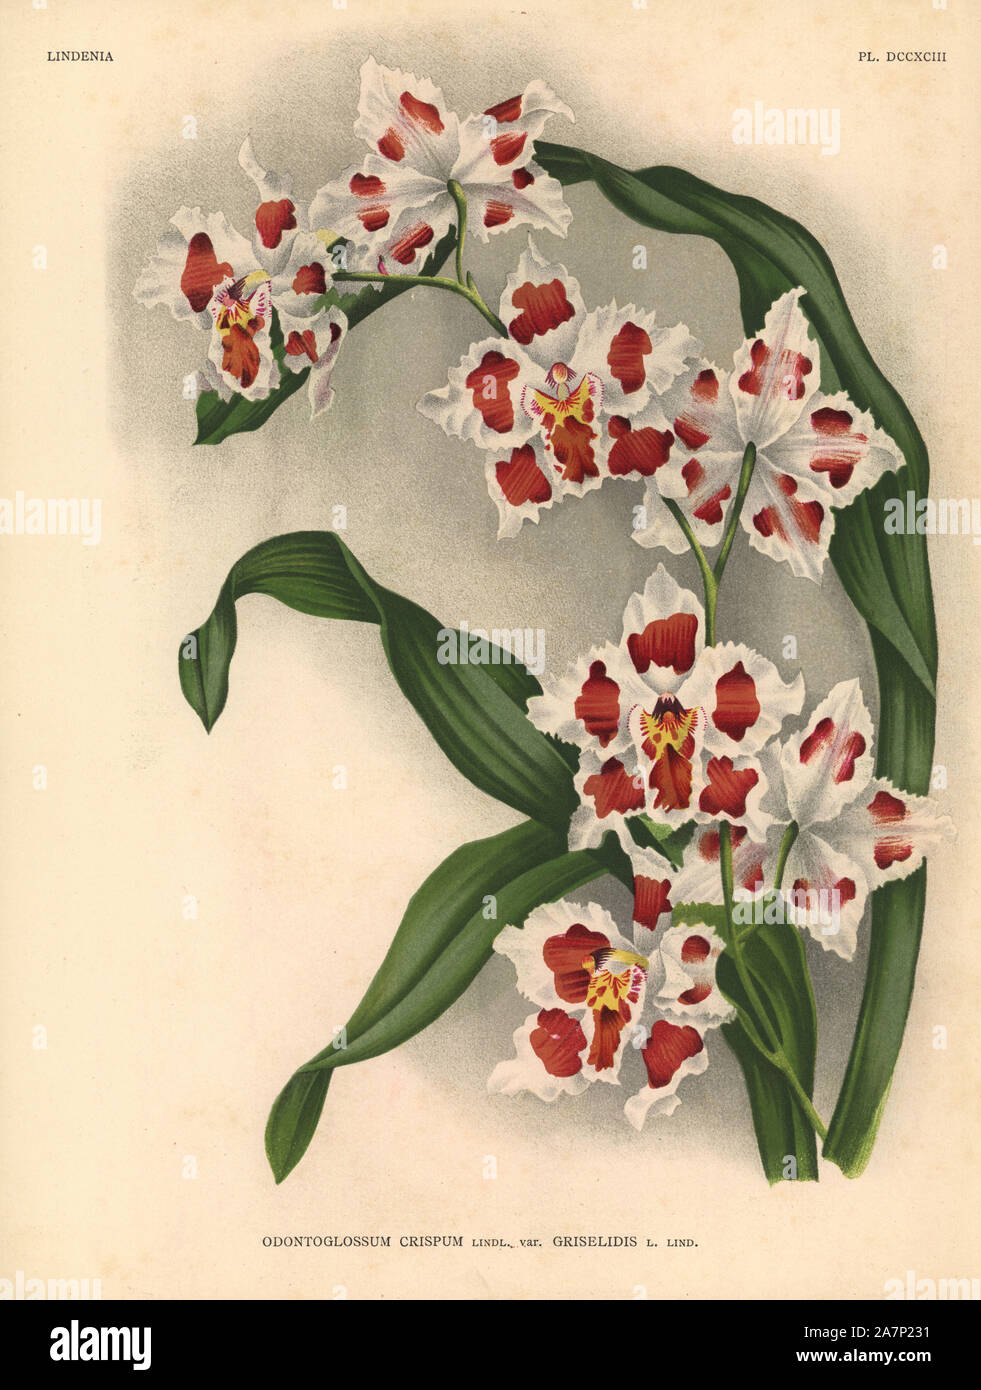 Griselidis variety of Odontoglossum crispum orchid. Botanical illustration in chromolithograph from Lucien Linden's 'Lindenia, Iconographie des Orchidees,' Brussels, 1903. Stock Photo